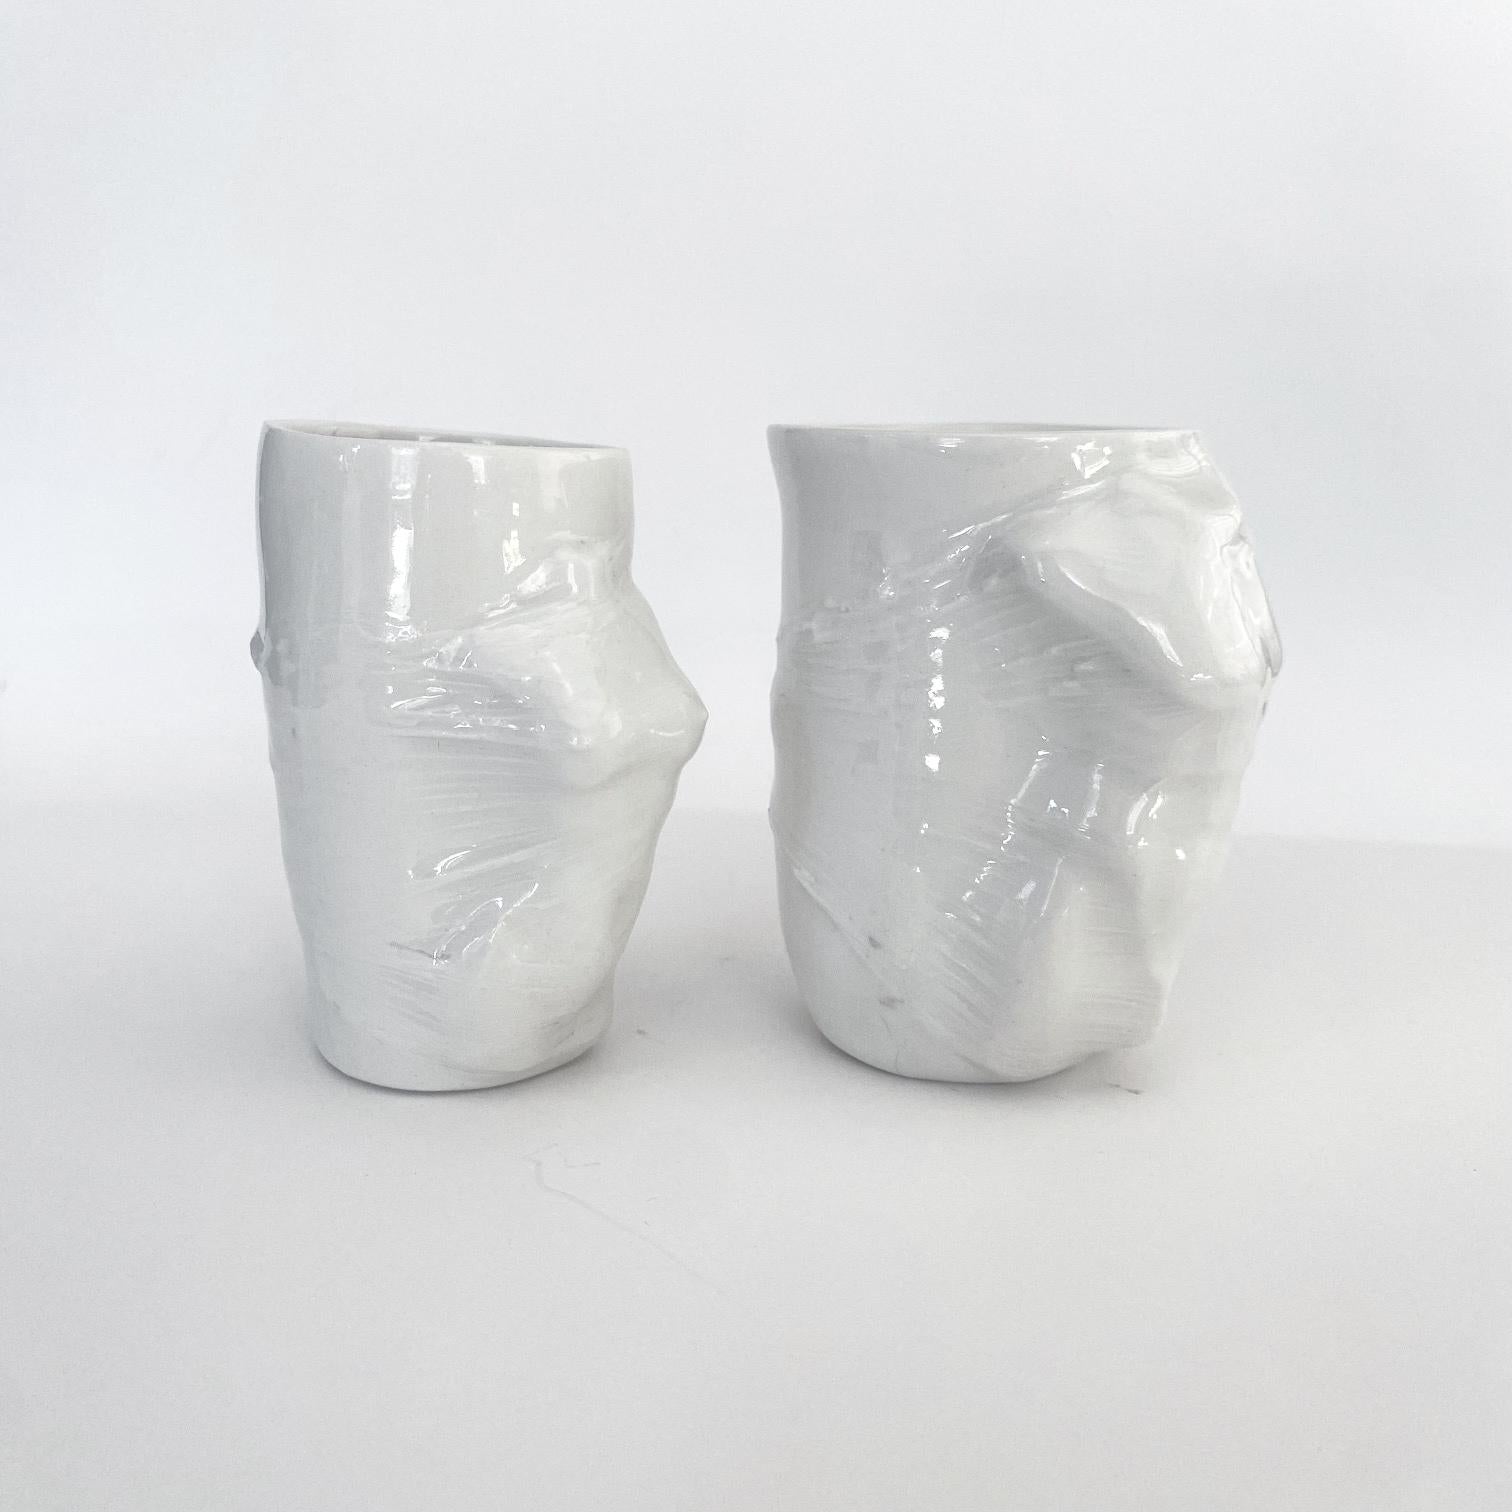 Contemporary Sculptural Porcelain Cups Set of 2 by Hulya Sozer, Male and Female Body, White For Sale